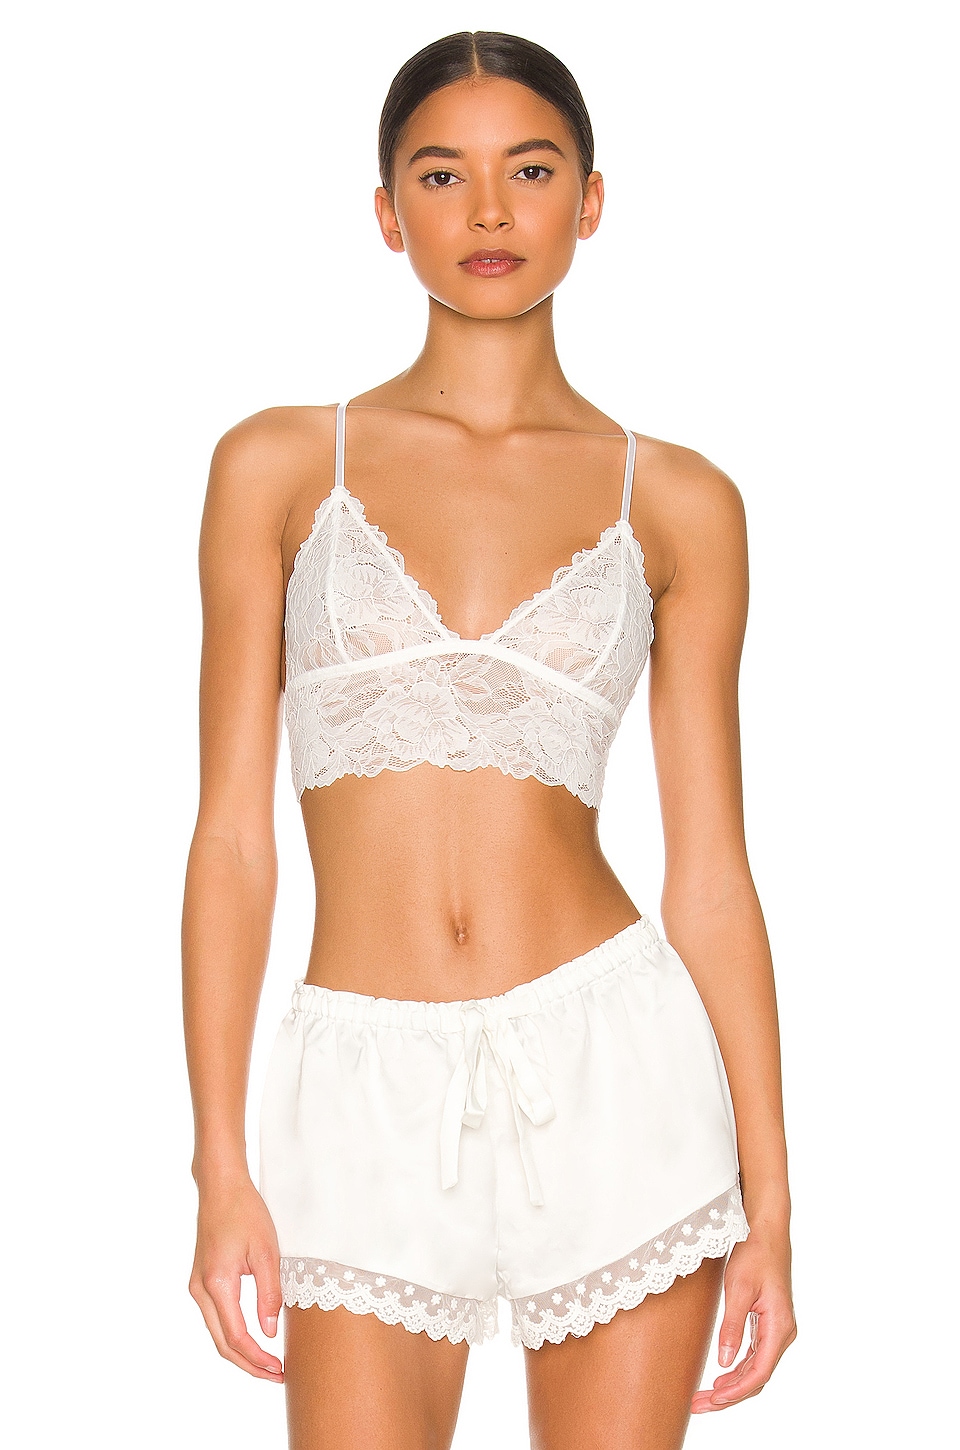 FREE PEOPLE Intimately - Daisy Lace Bralette in Ivory